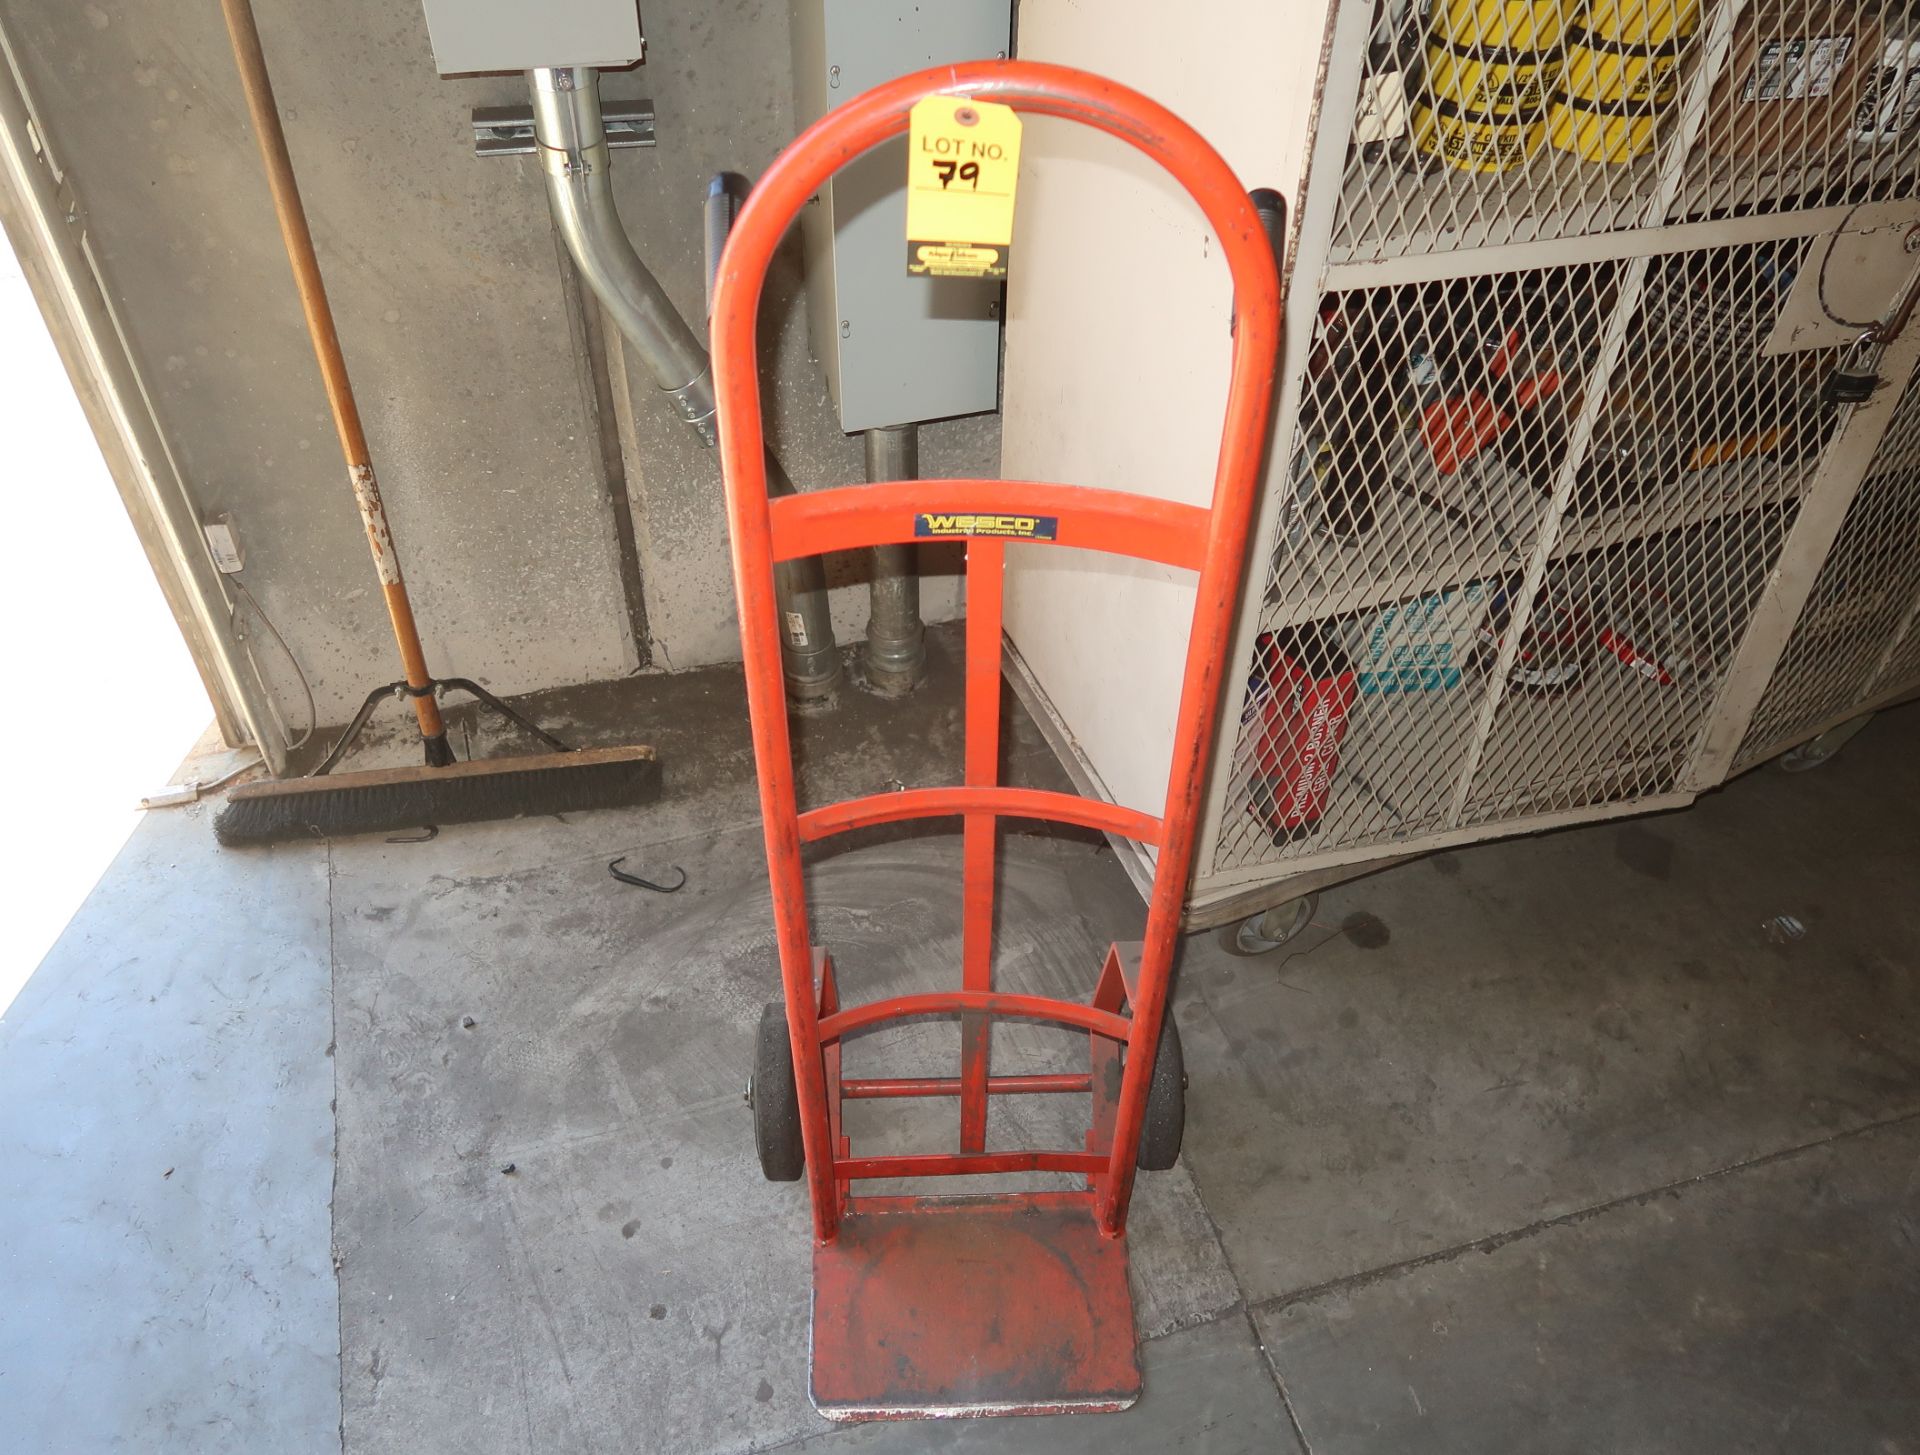 HAND TRUCK, SOLID TIRES